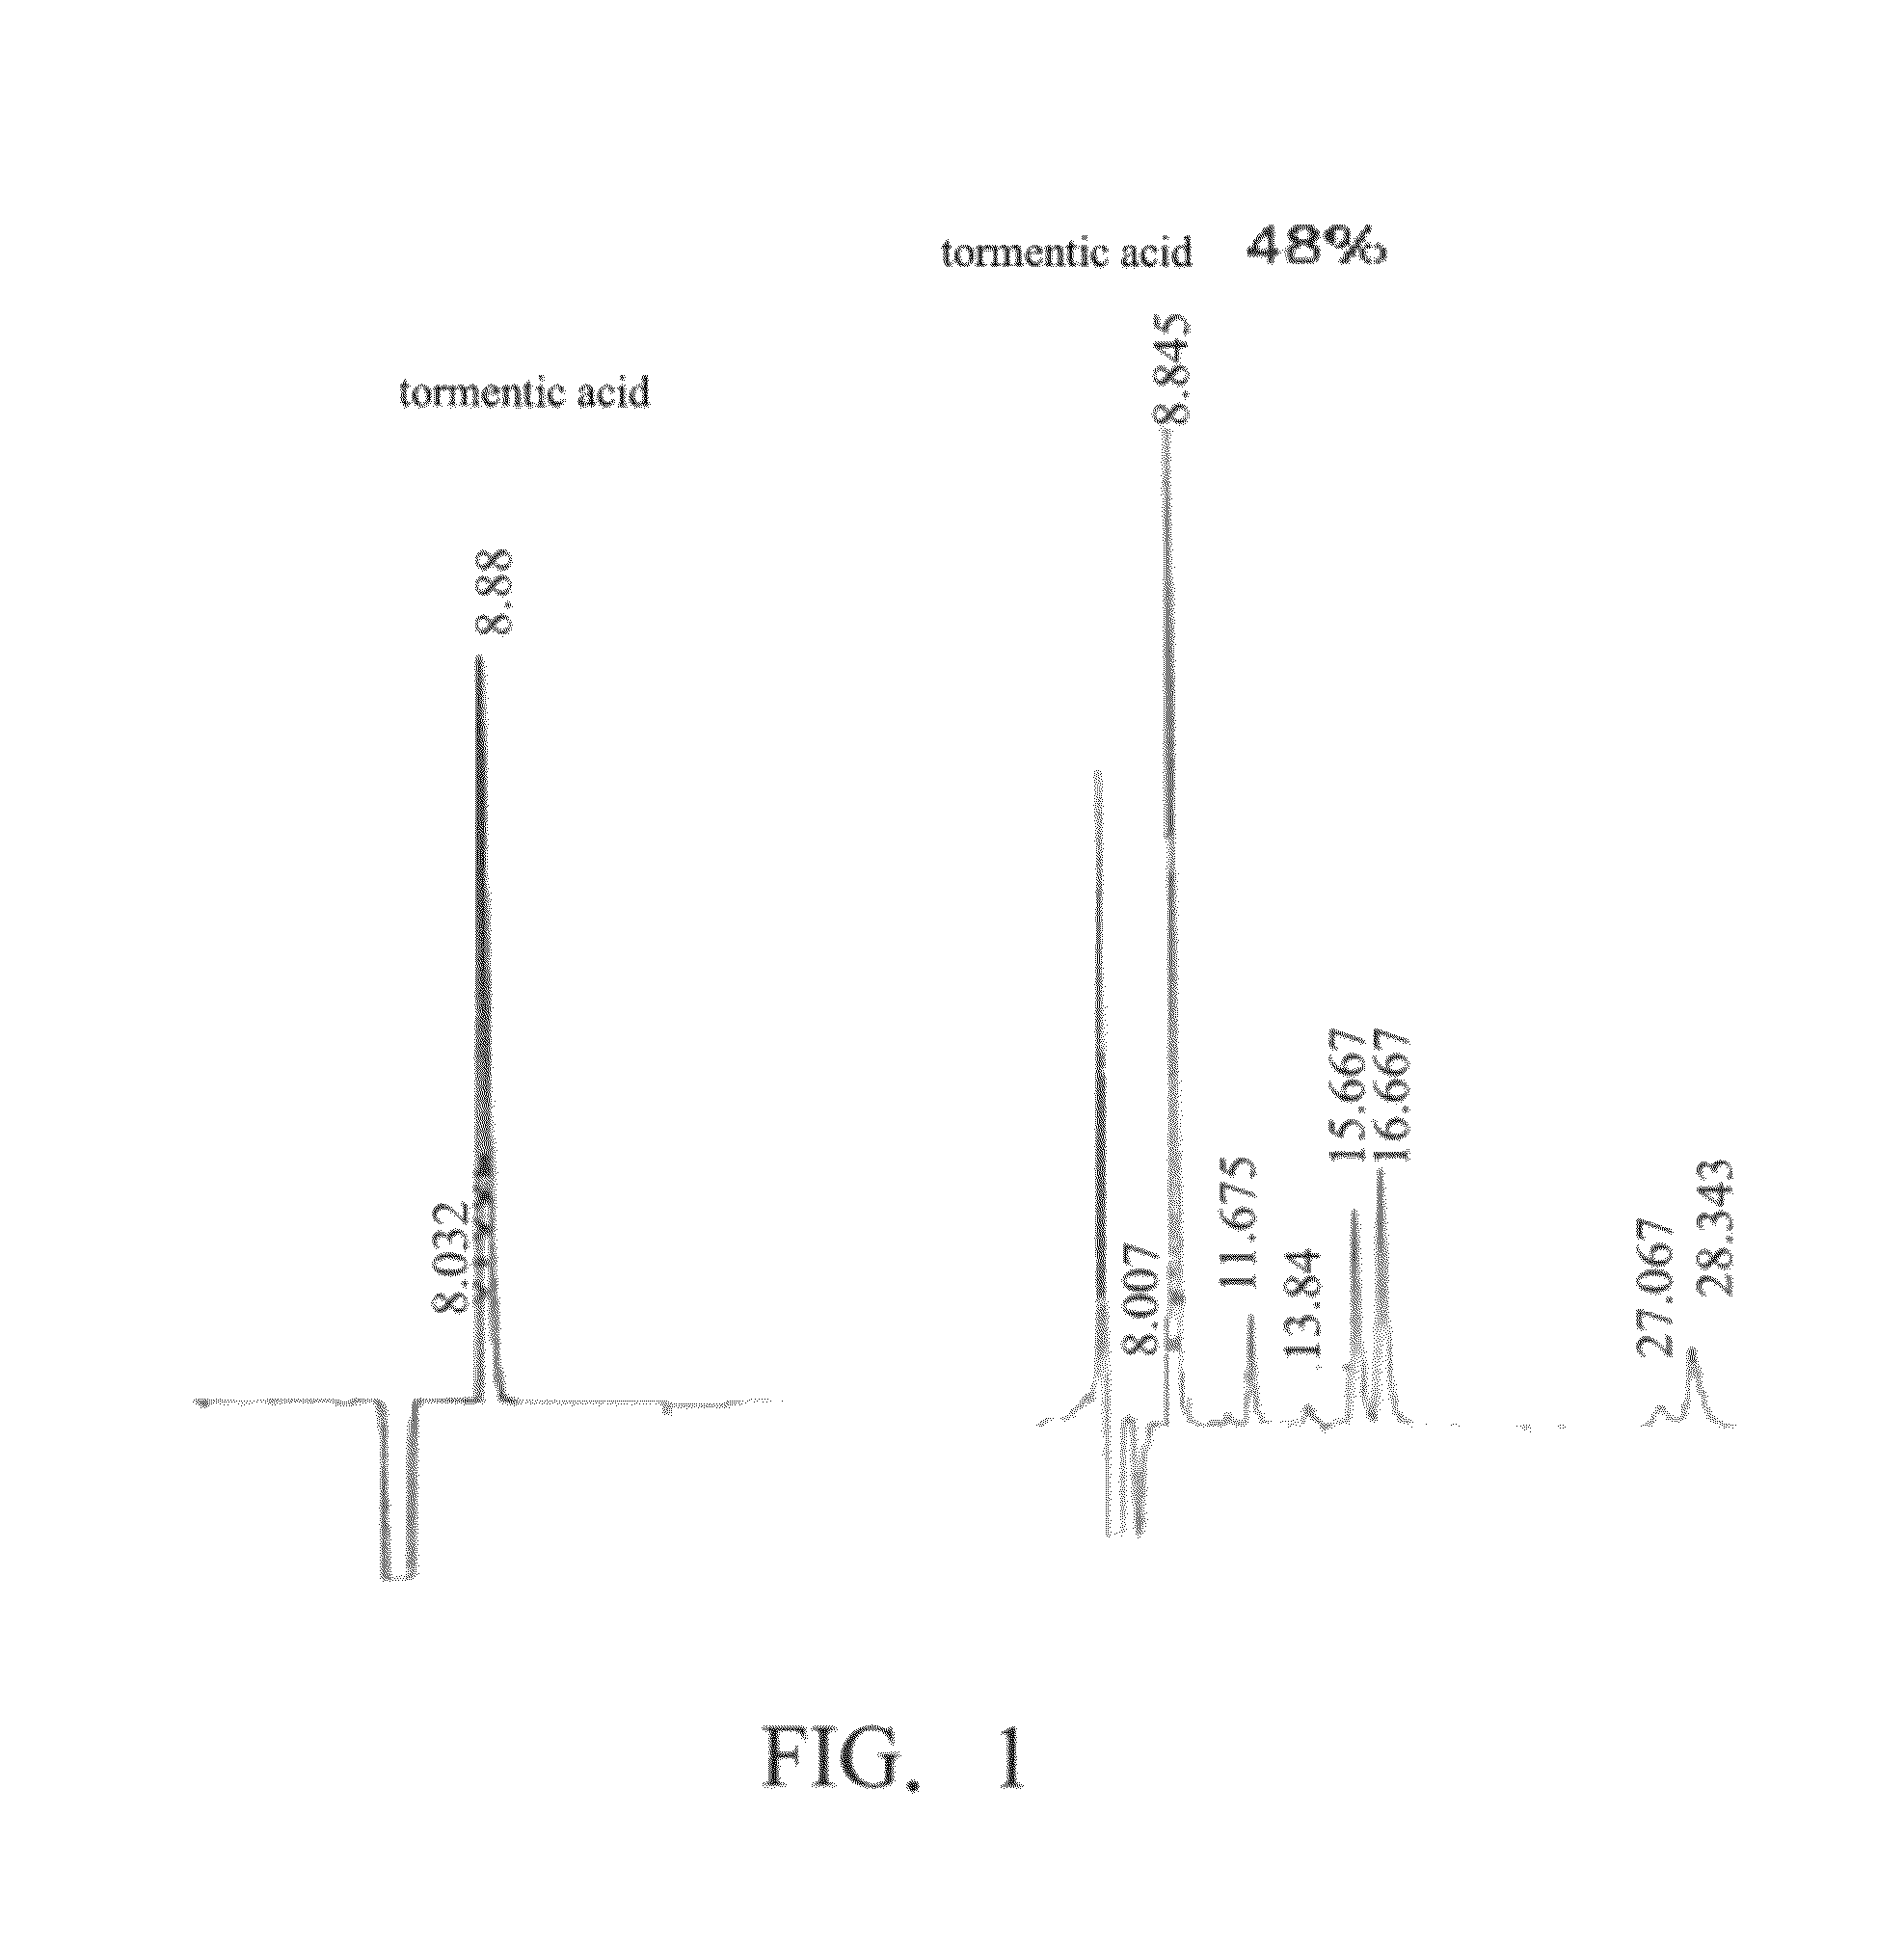 Method for inhibiting activity and/or expression of matrix metalloproteinase, inhibiting phosphorylation of mitogen-activated protein kinase, and/or promoting expression of collagen using tormentic acid